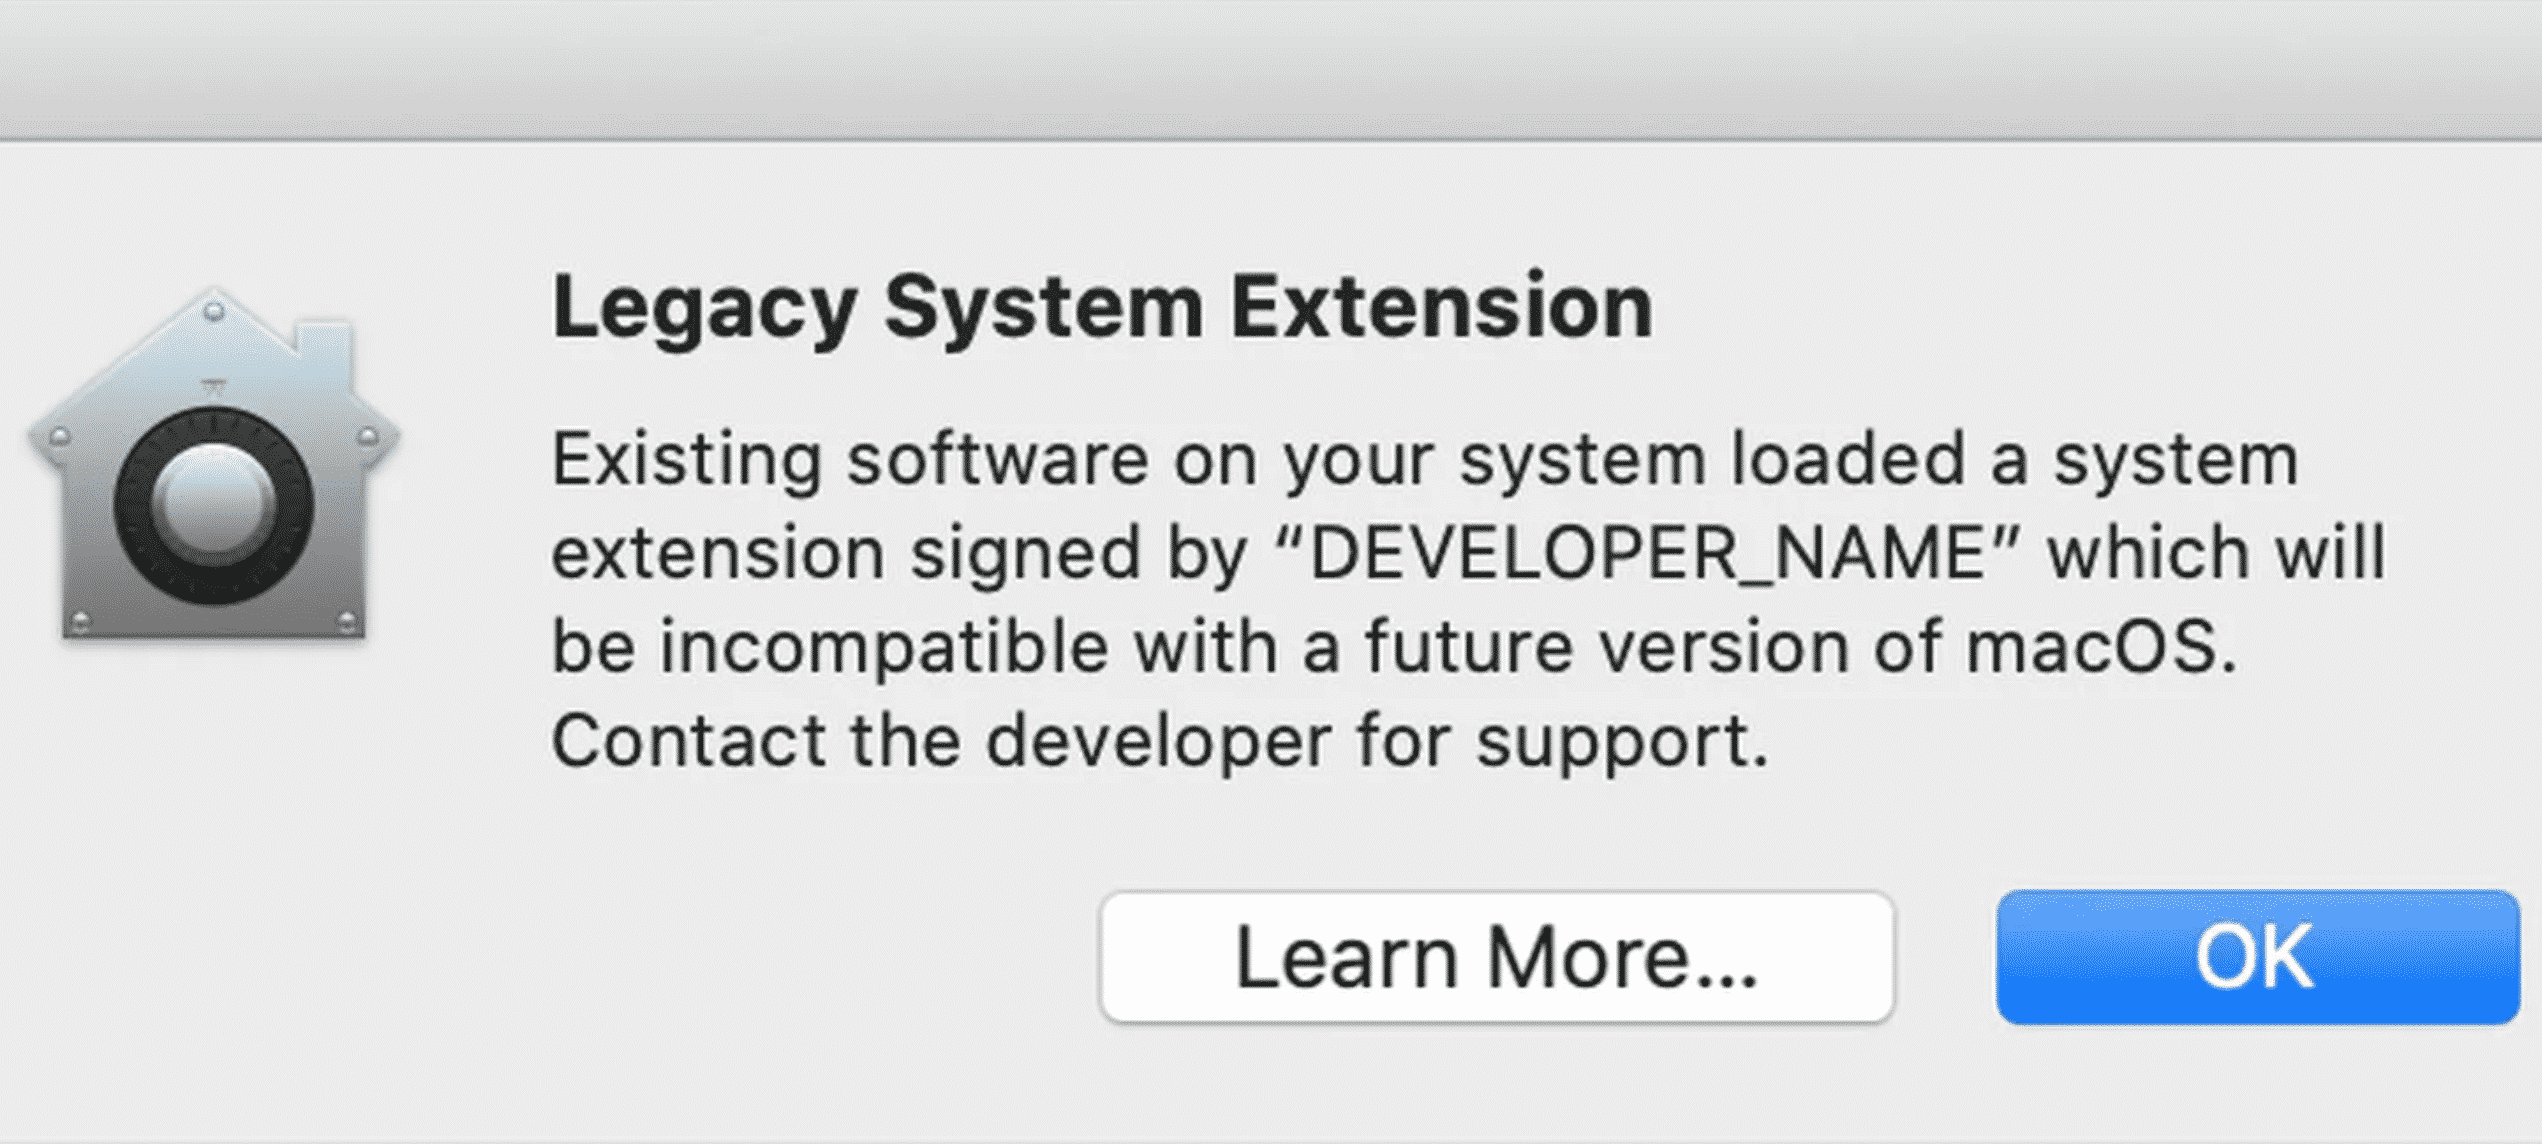 Legacy System Extensions